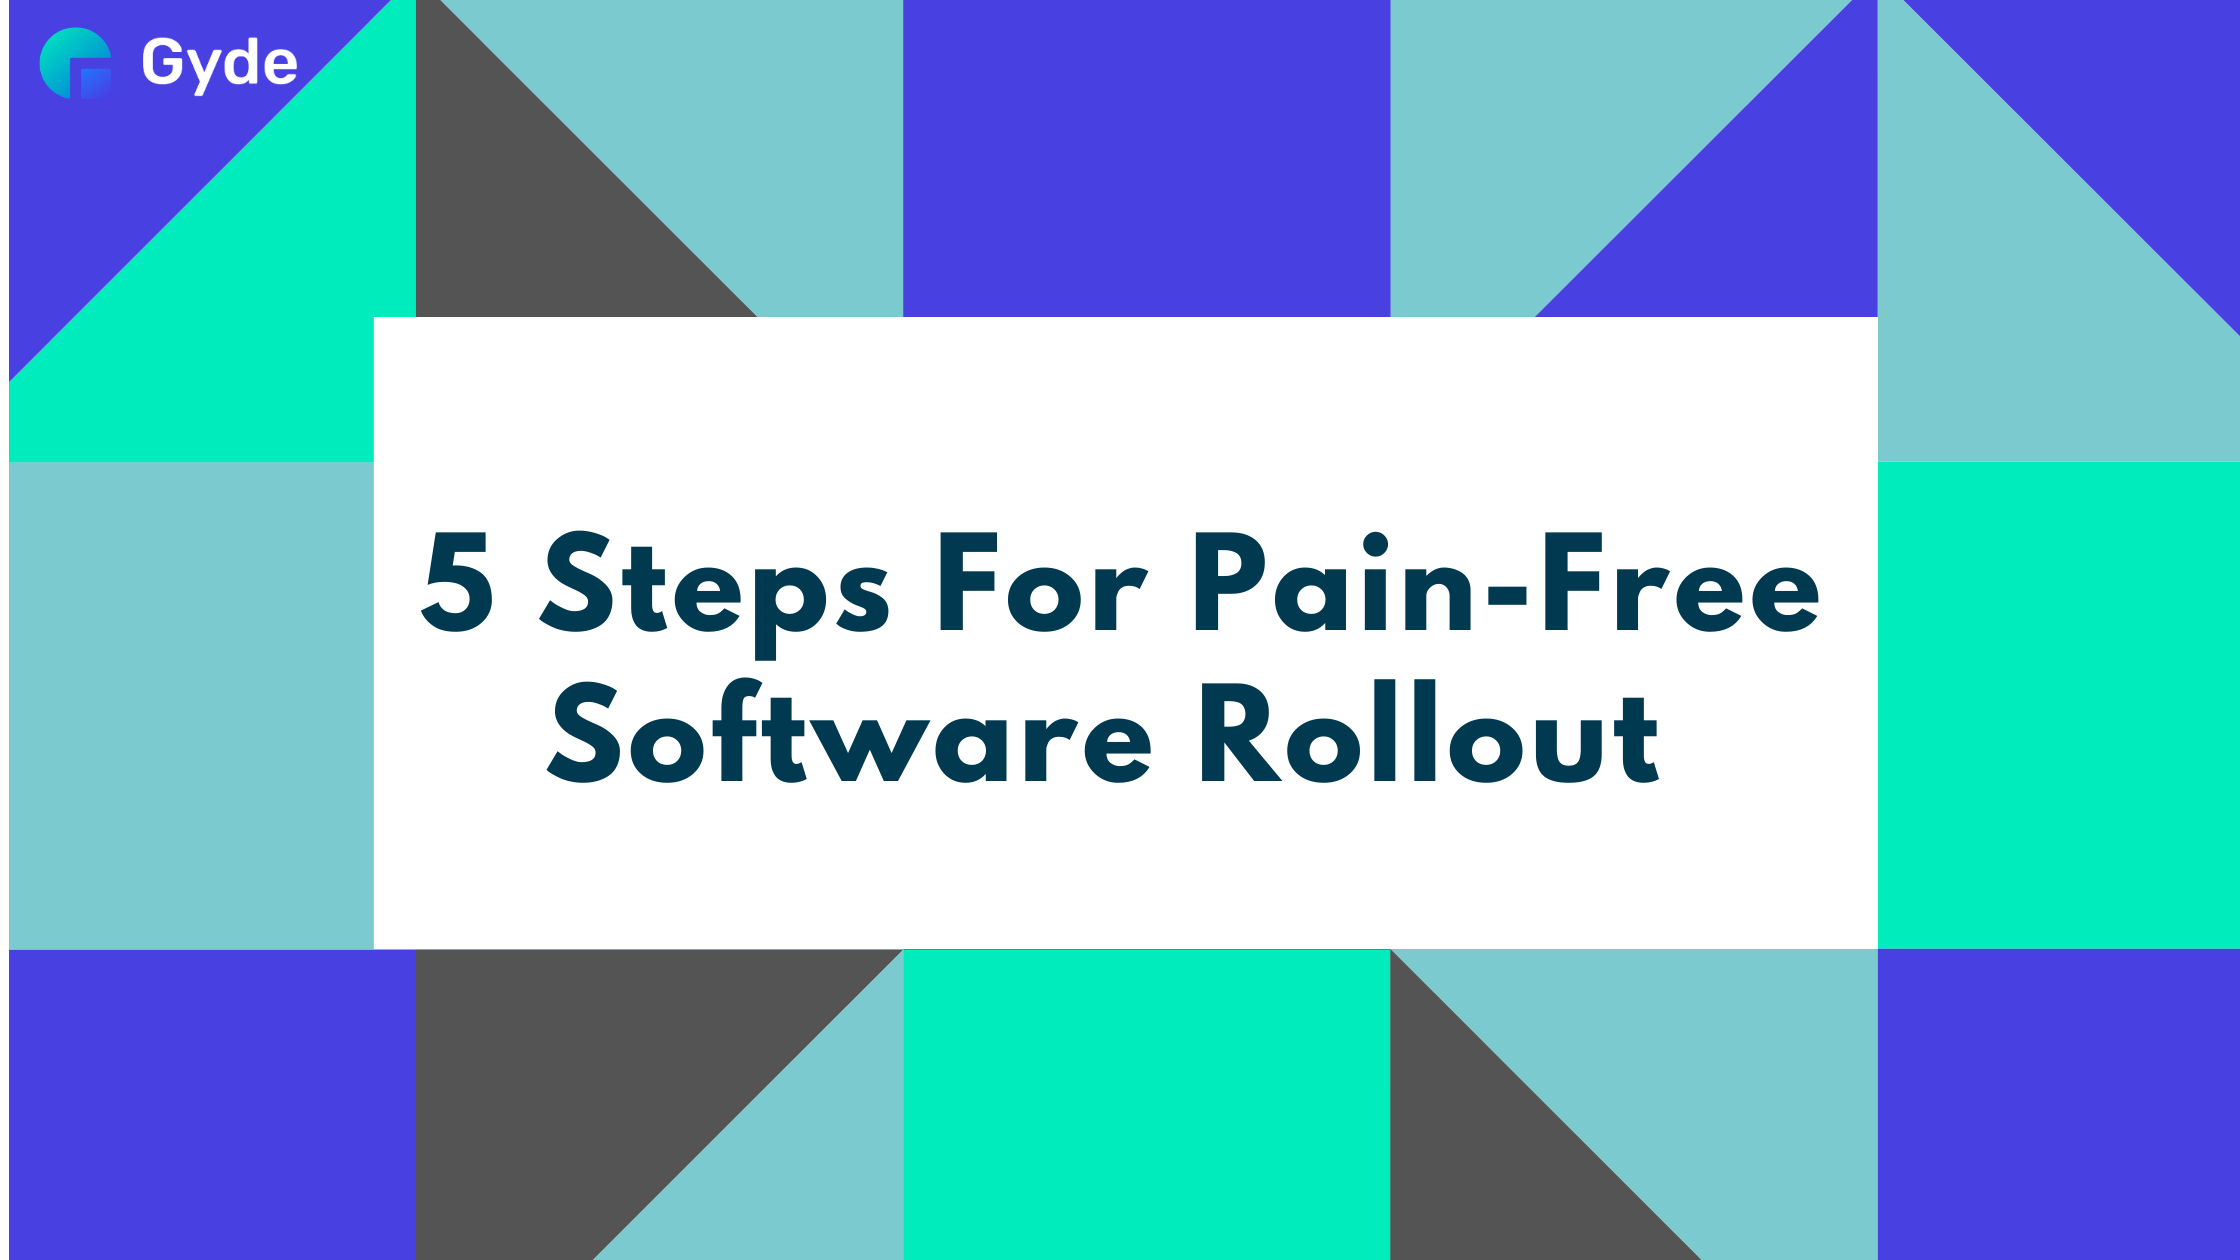 5 Steps For Pain-Free Software Rollout